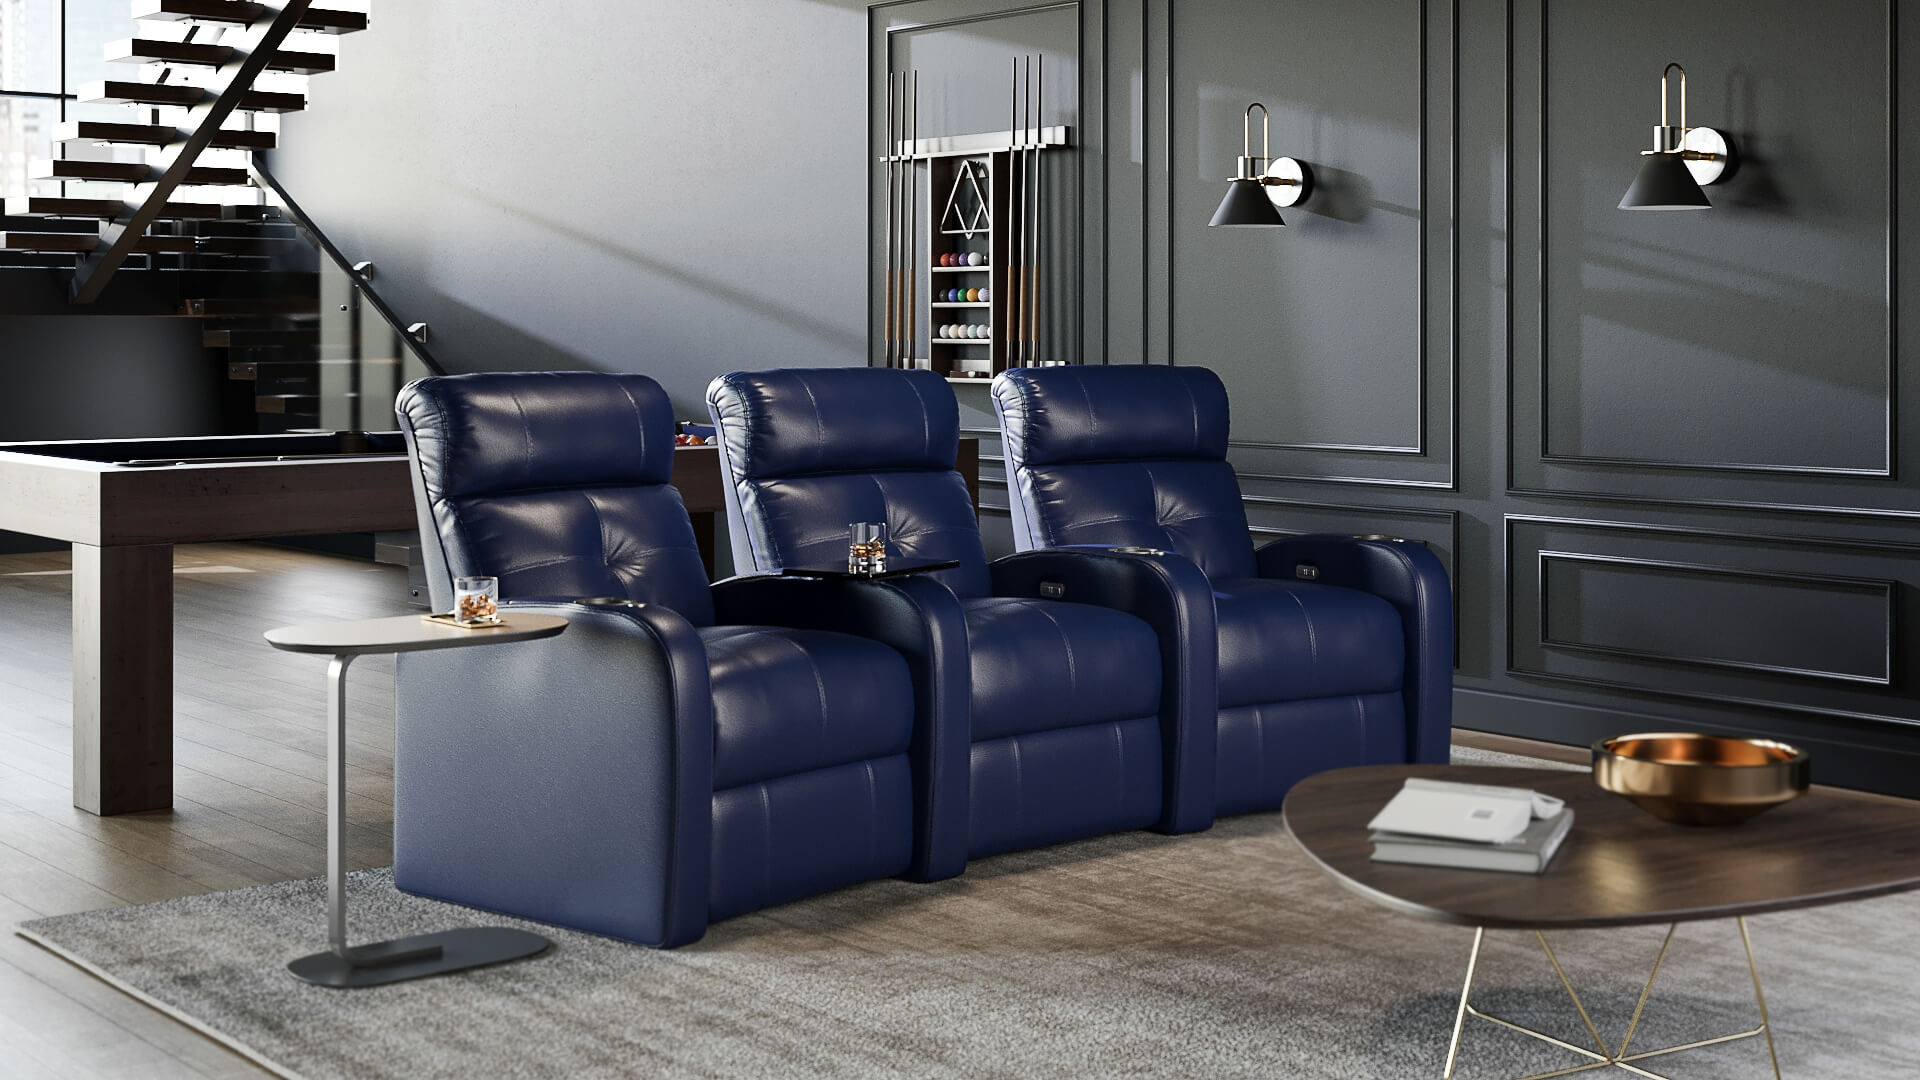 Blue Armchairs Lifestyle CG Rendering